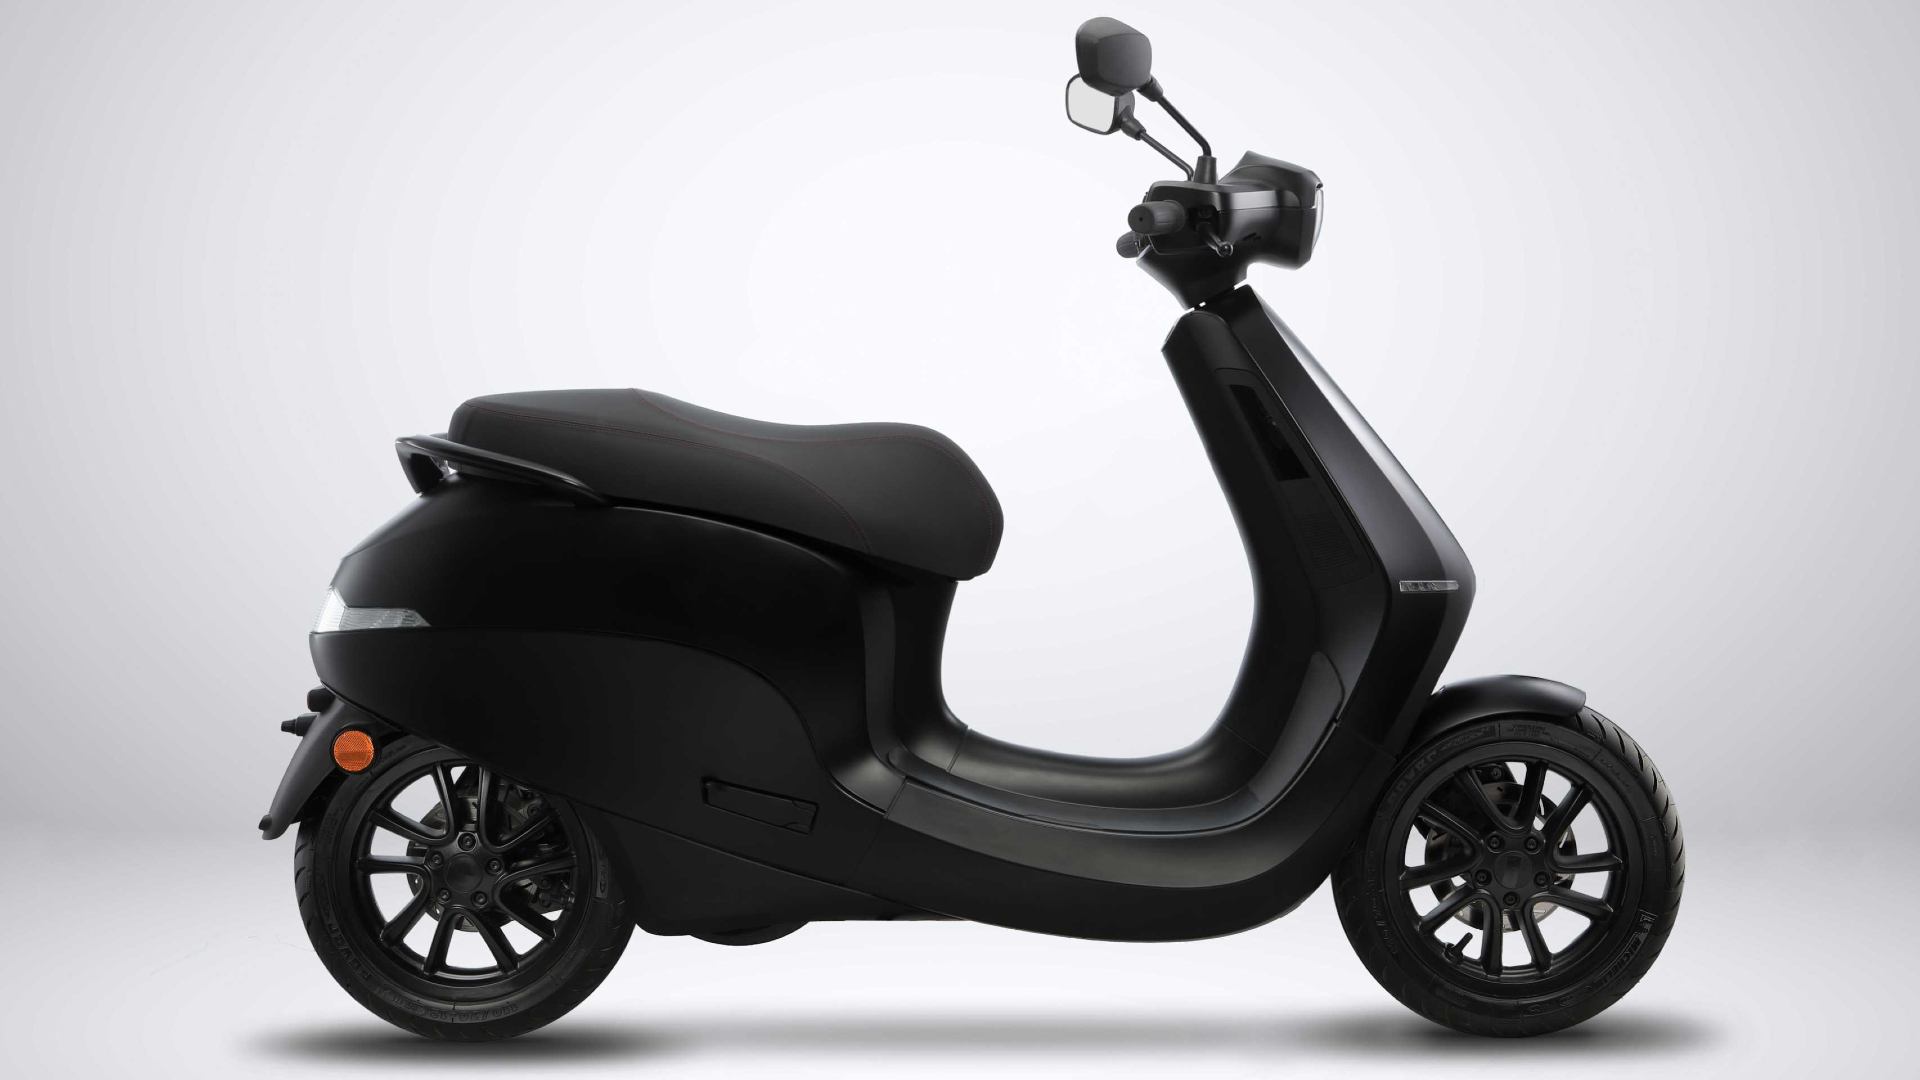 The Ola electric scooter retains the clean, straightforward appearance of the Etergo AppScooter. Image: Ola Electric